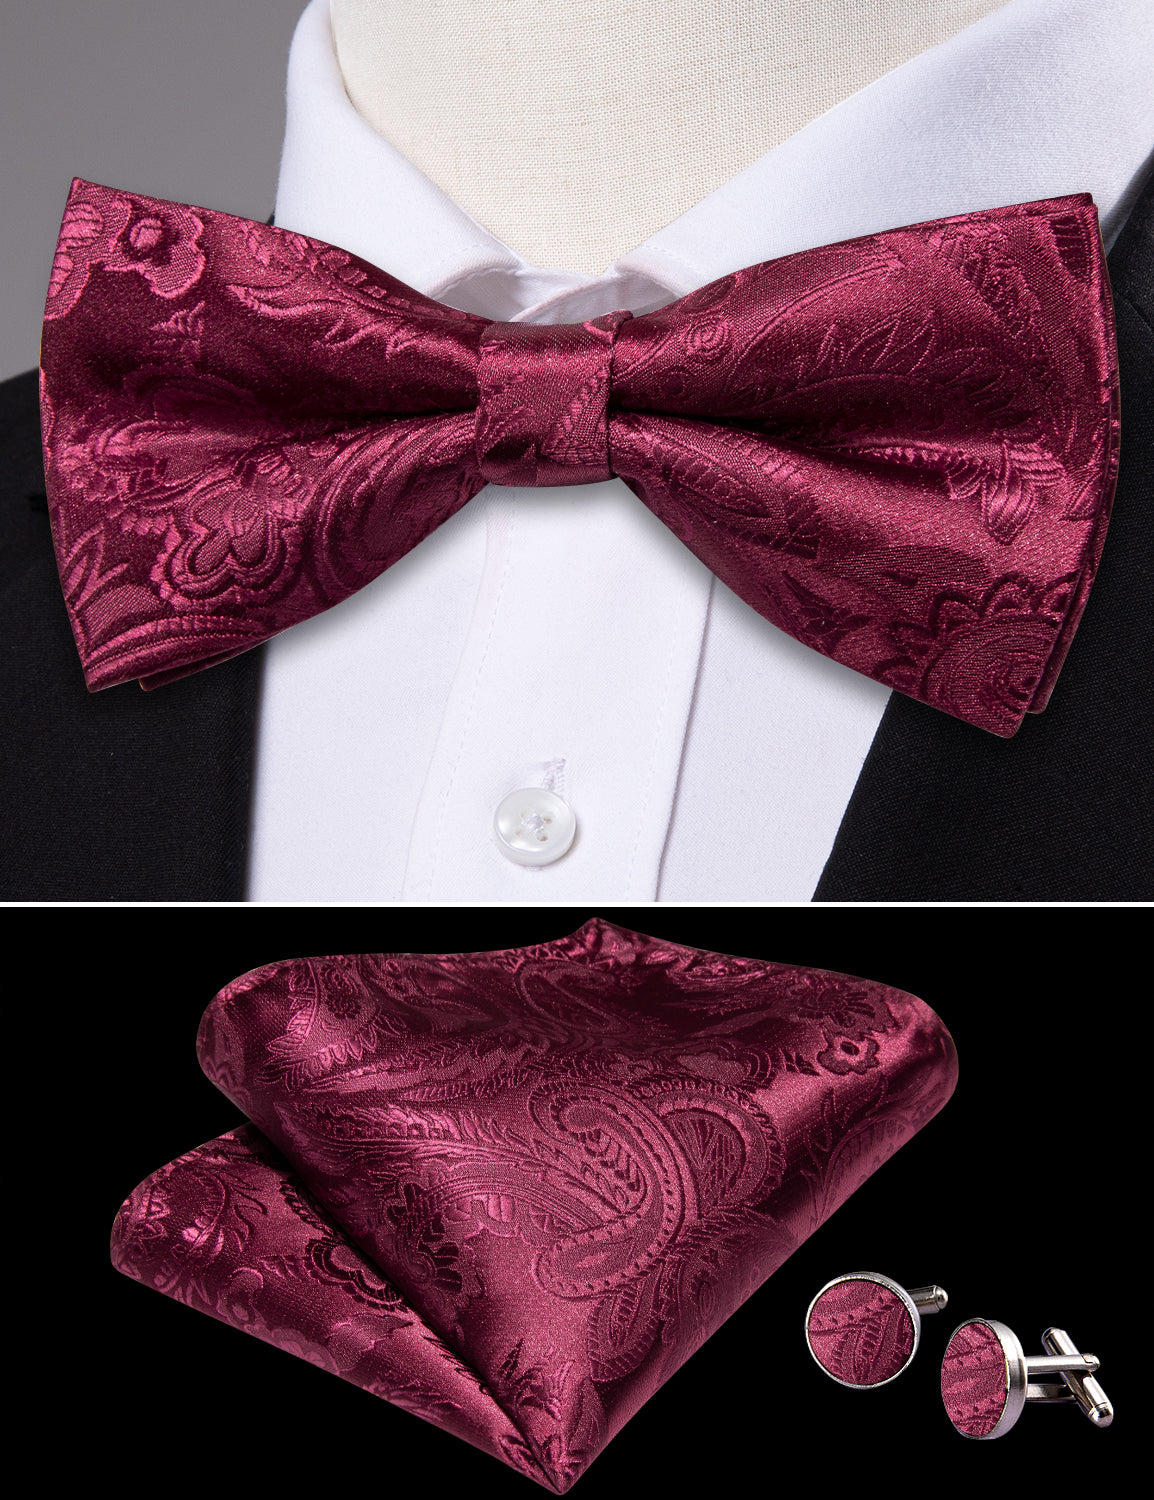 Barry.wang Floral Tie Red Wine Paisley Pre-tied Bow Tie Hanky Cufflinks Set